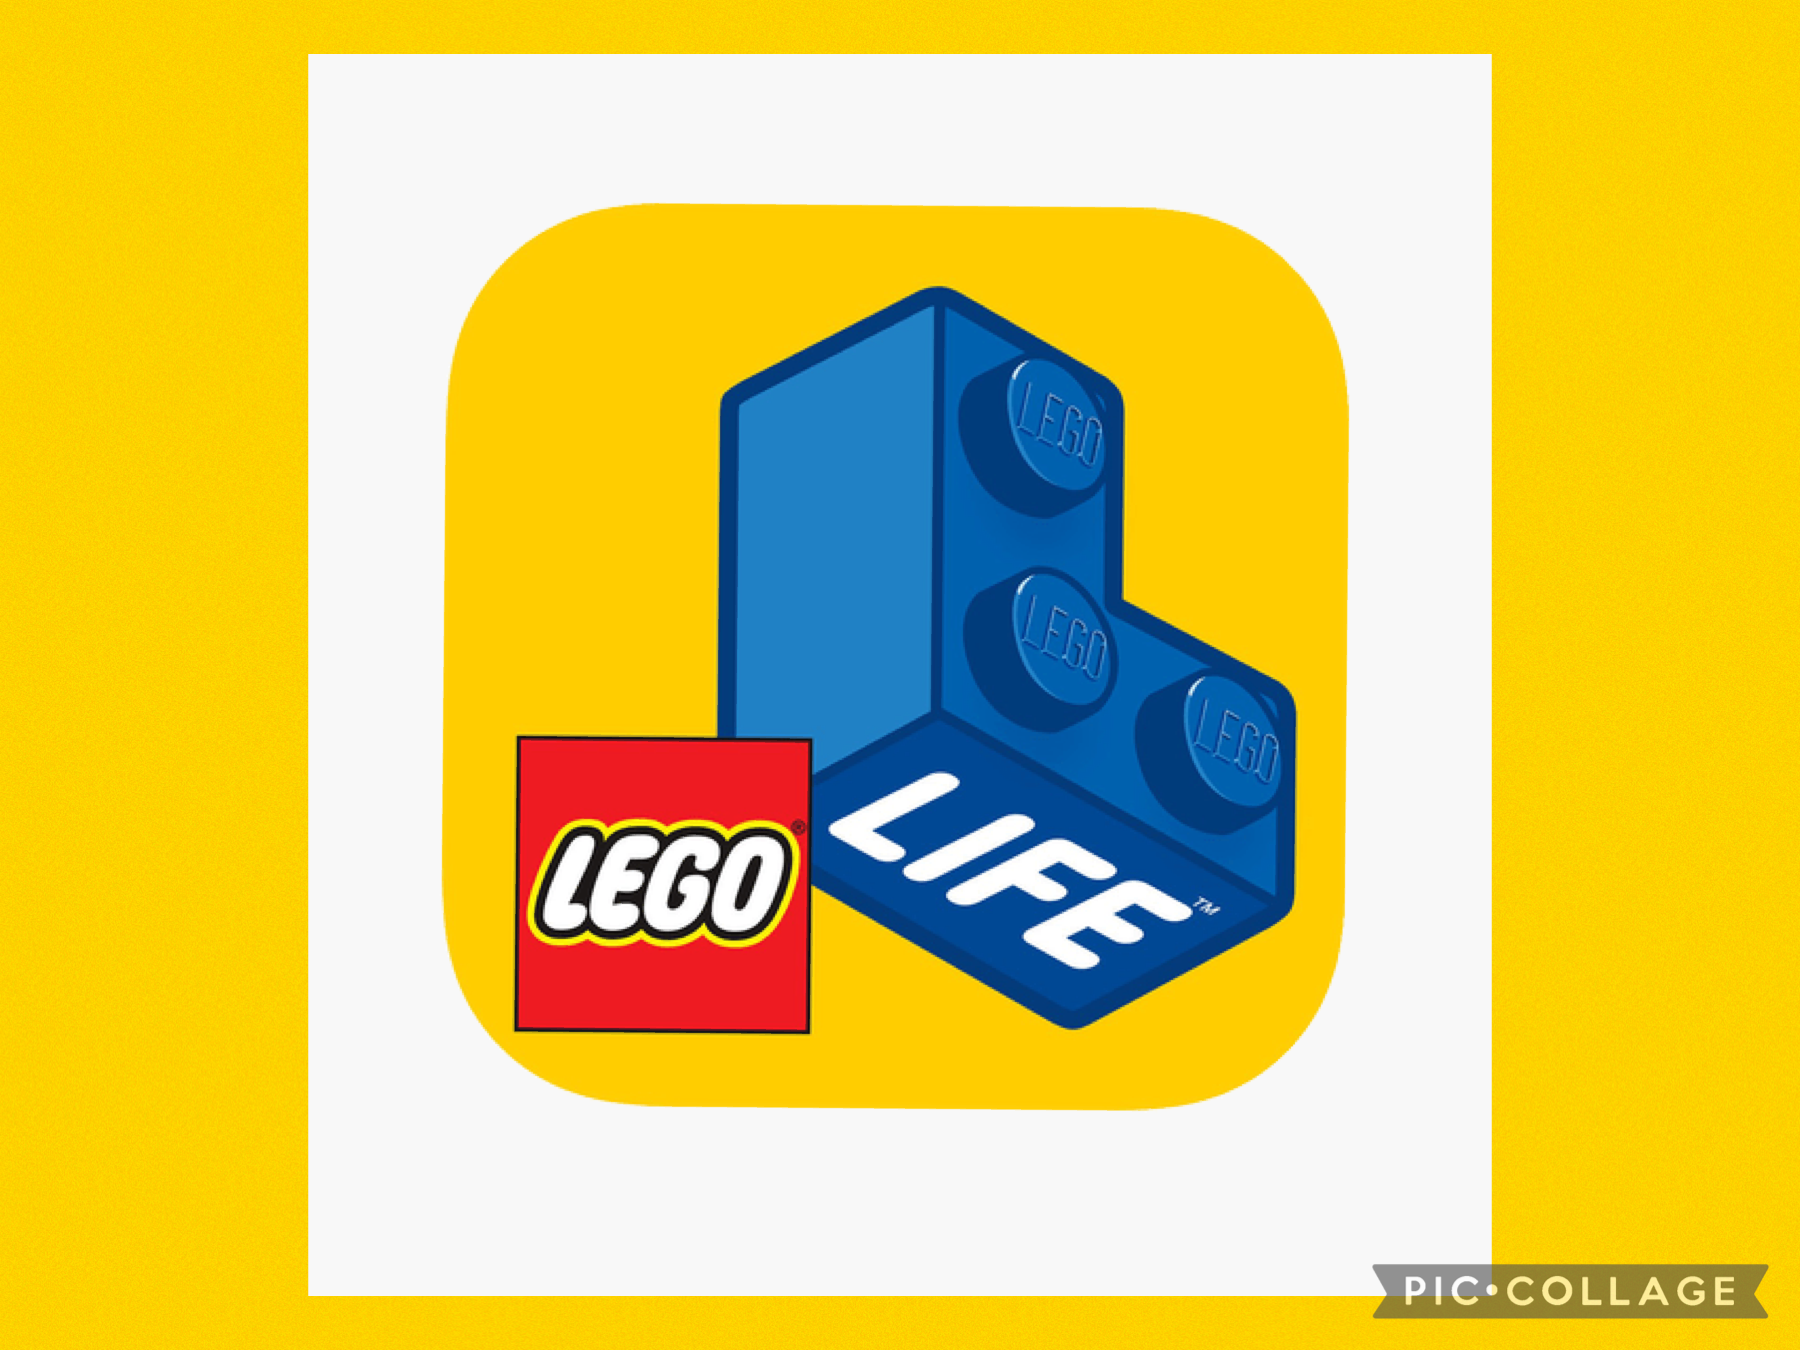 If you really are a LEGO fan, you should get this app, LEGO Life. It is really amazing. You could post about LEGO related things, and join challenges. I have this, because it’s so good.